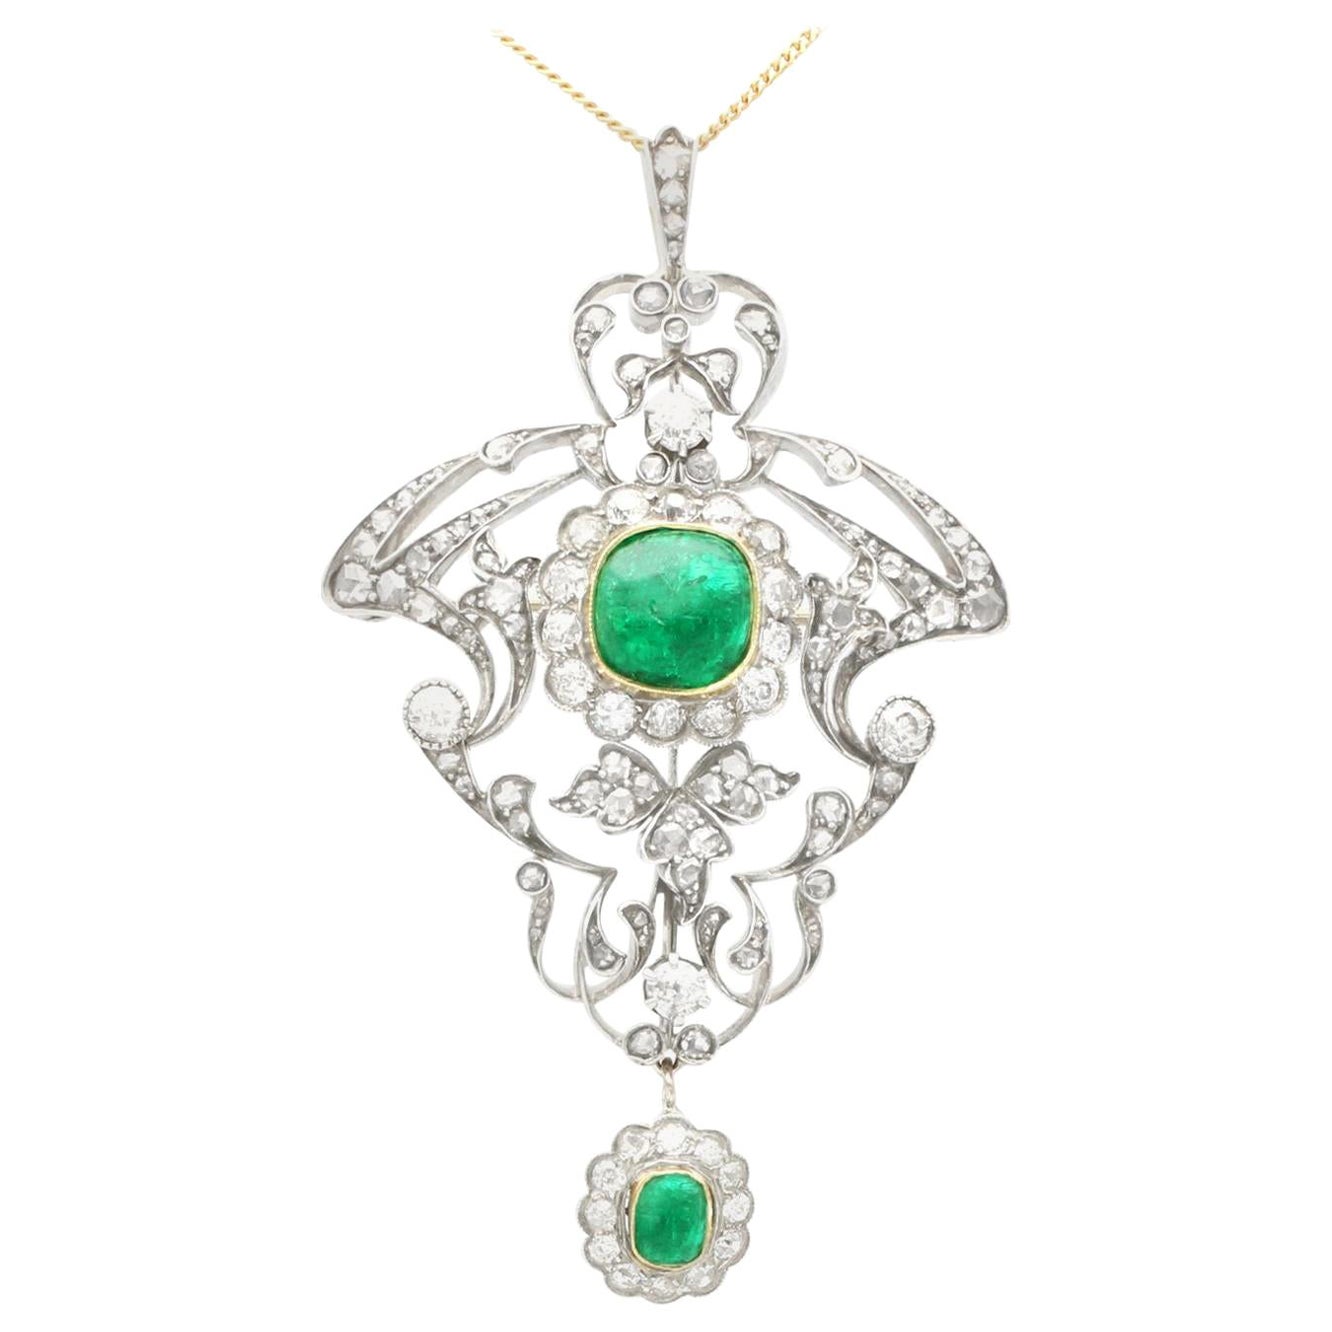 1900s 3.53ct Cabochon Cut Emerald and 5.89ct Diamond Gold Pendant / Brooch For Sale